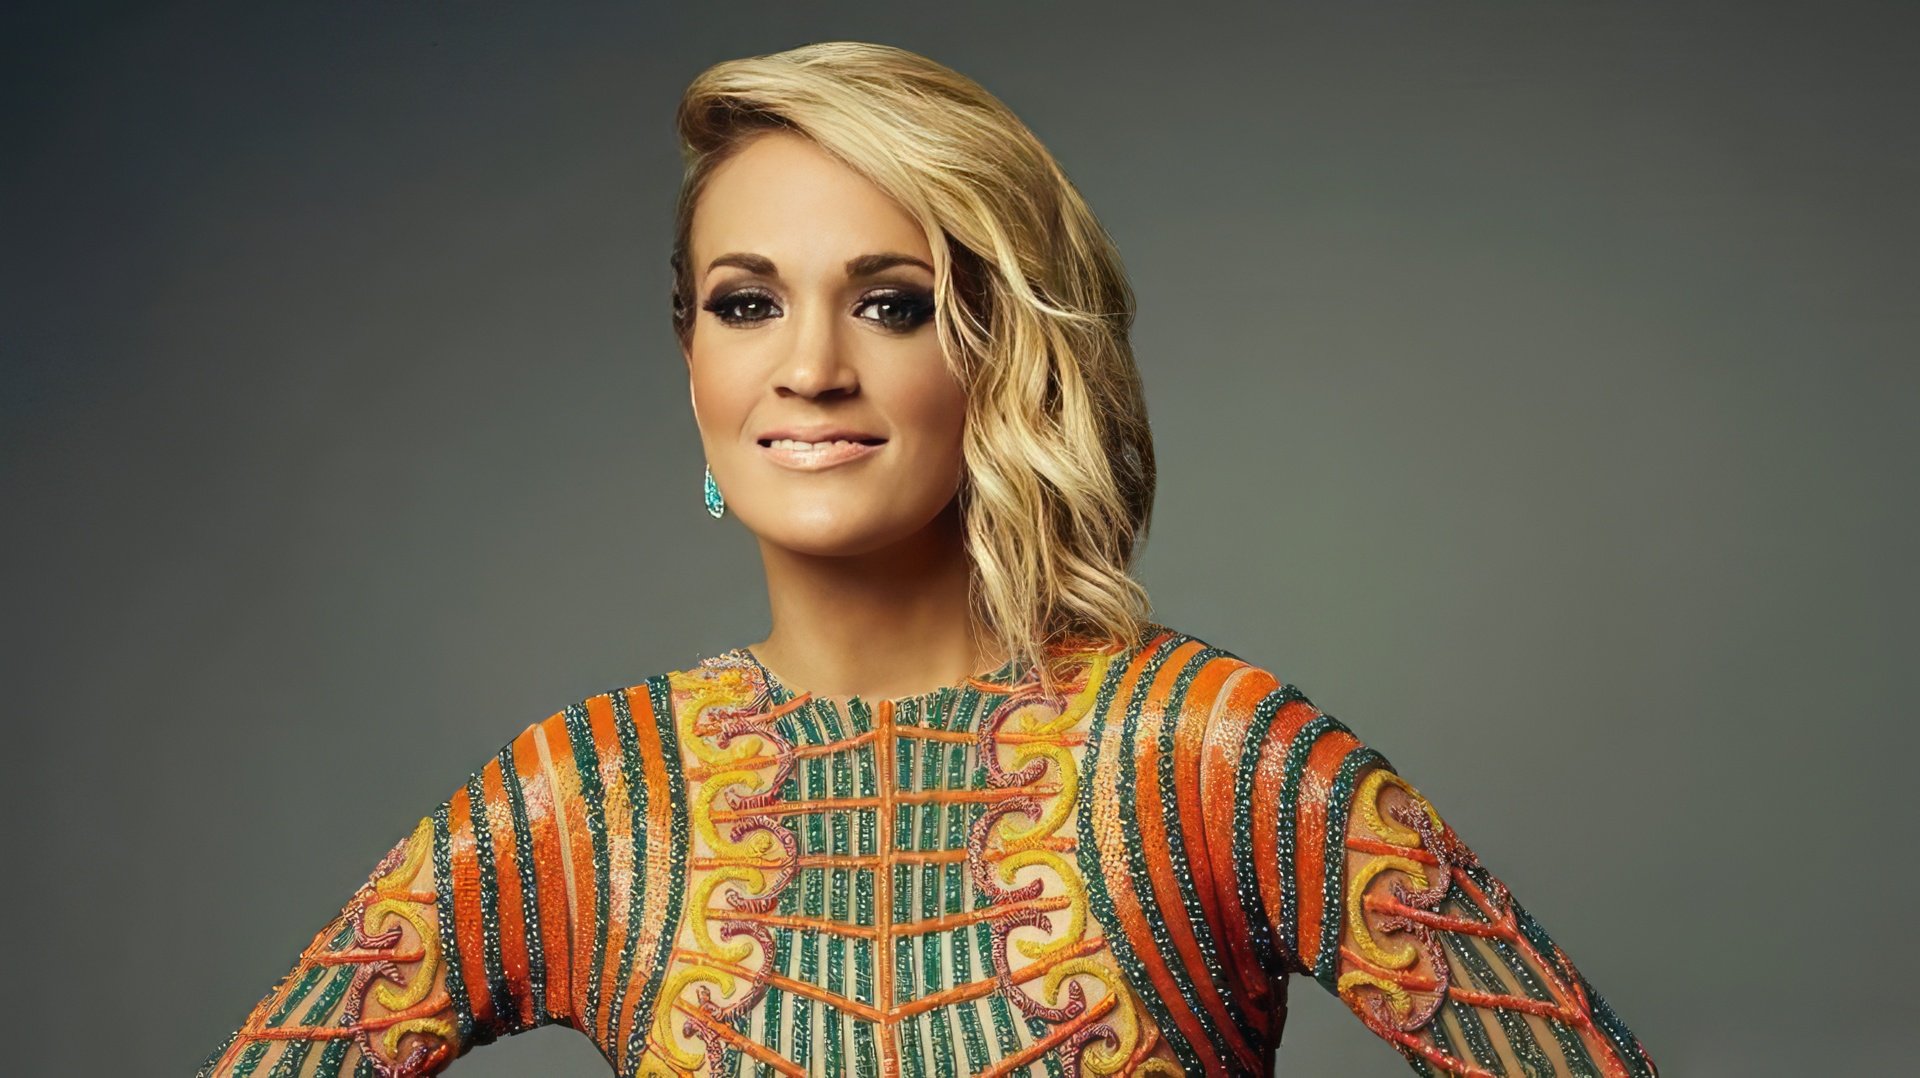 American country singer Carrie Underwood